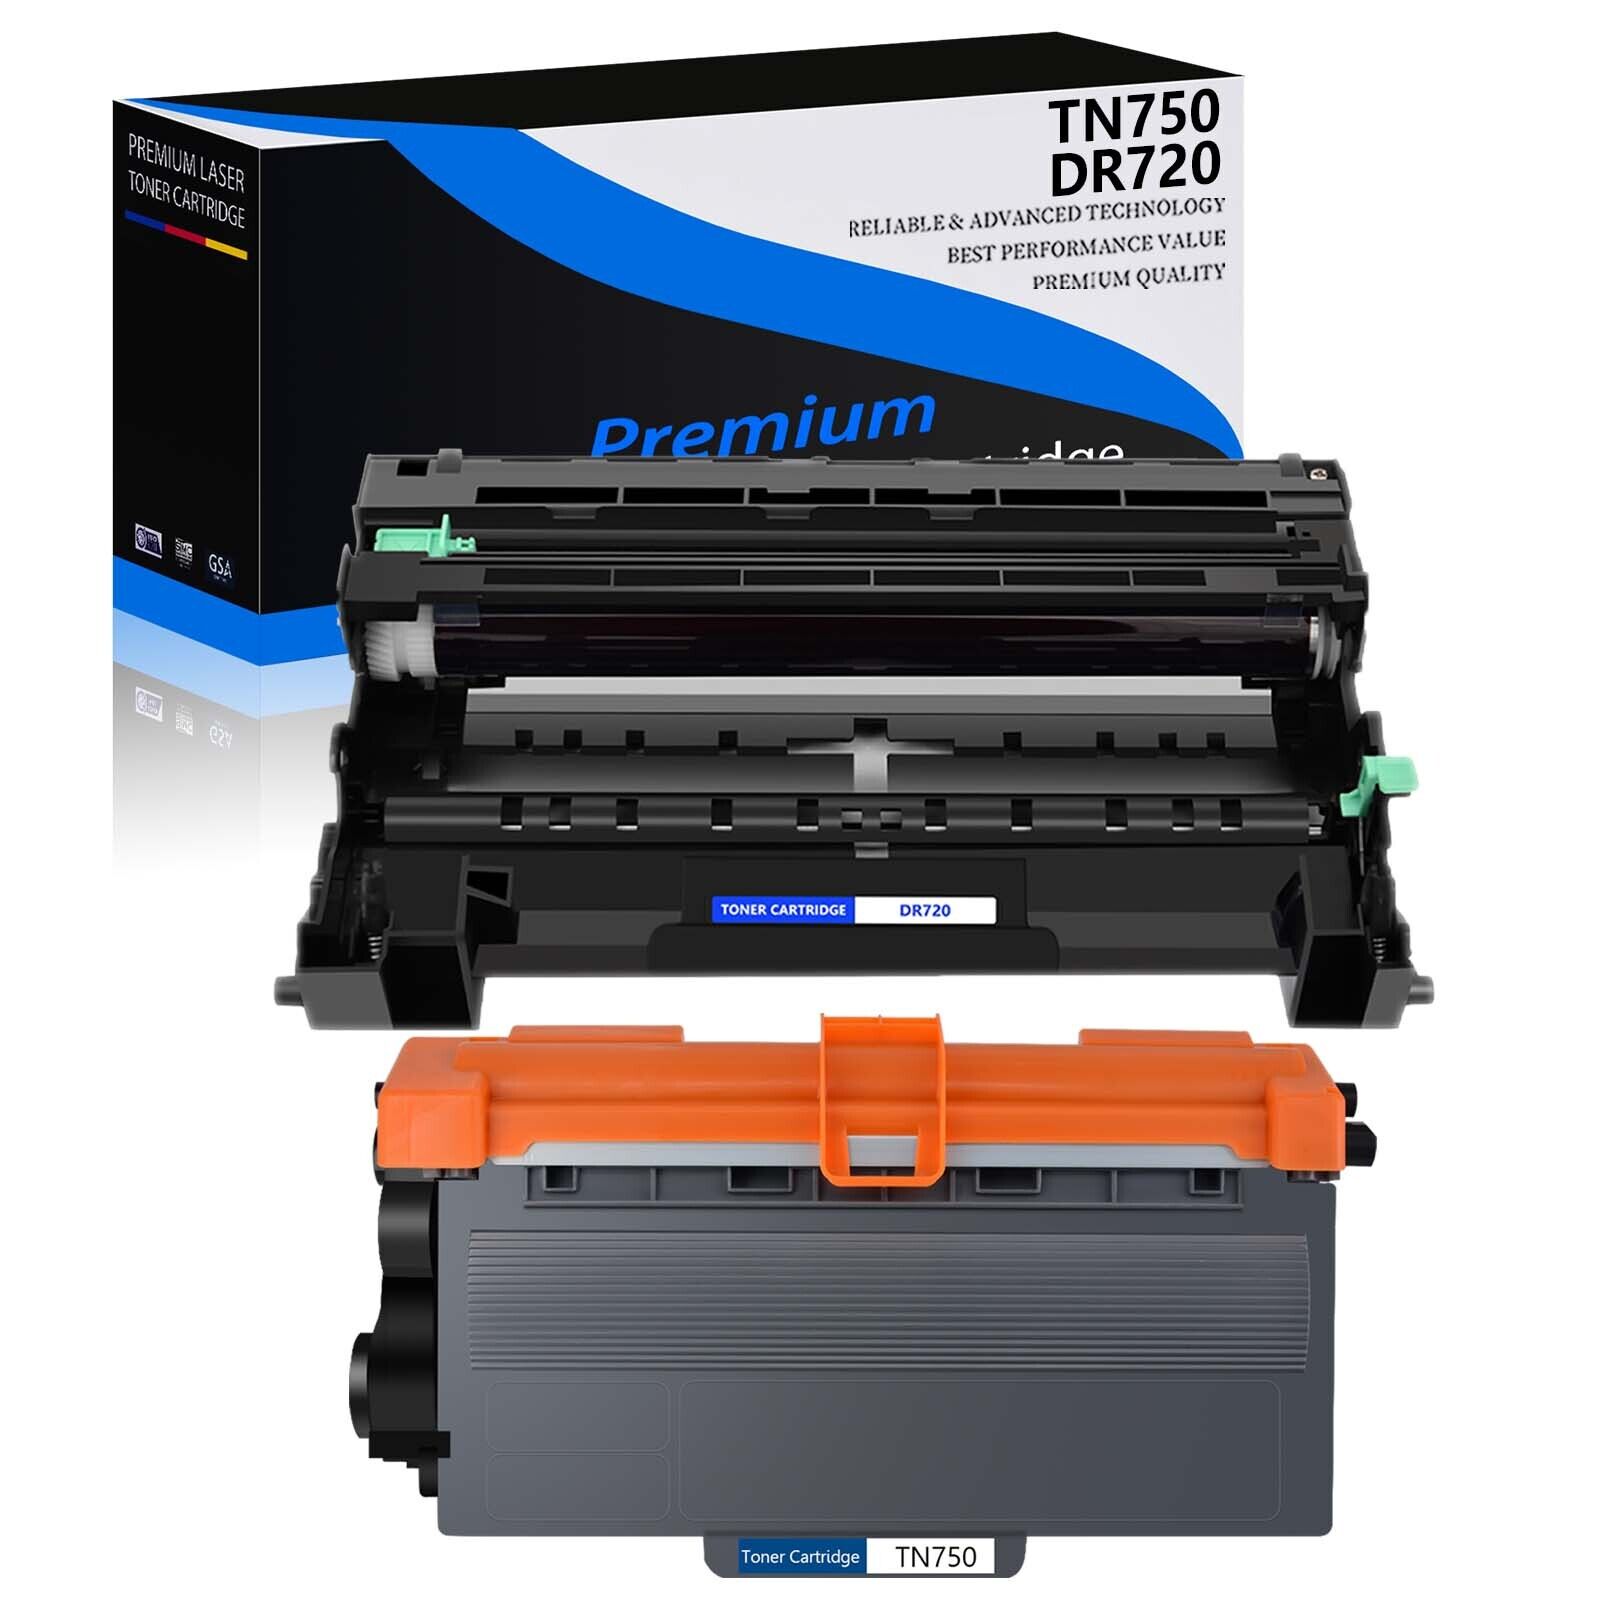 1PK TN750 Toner Cartridge +1PK DR720 Drum for Brother MFC-8510DN 8710DW 8110DN